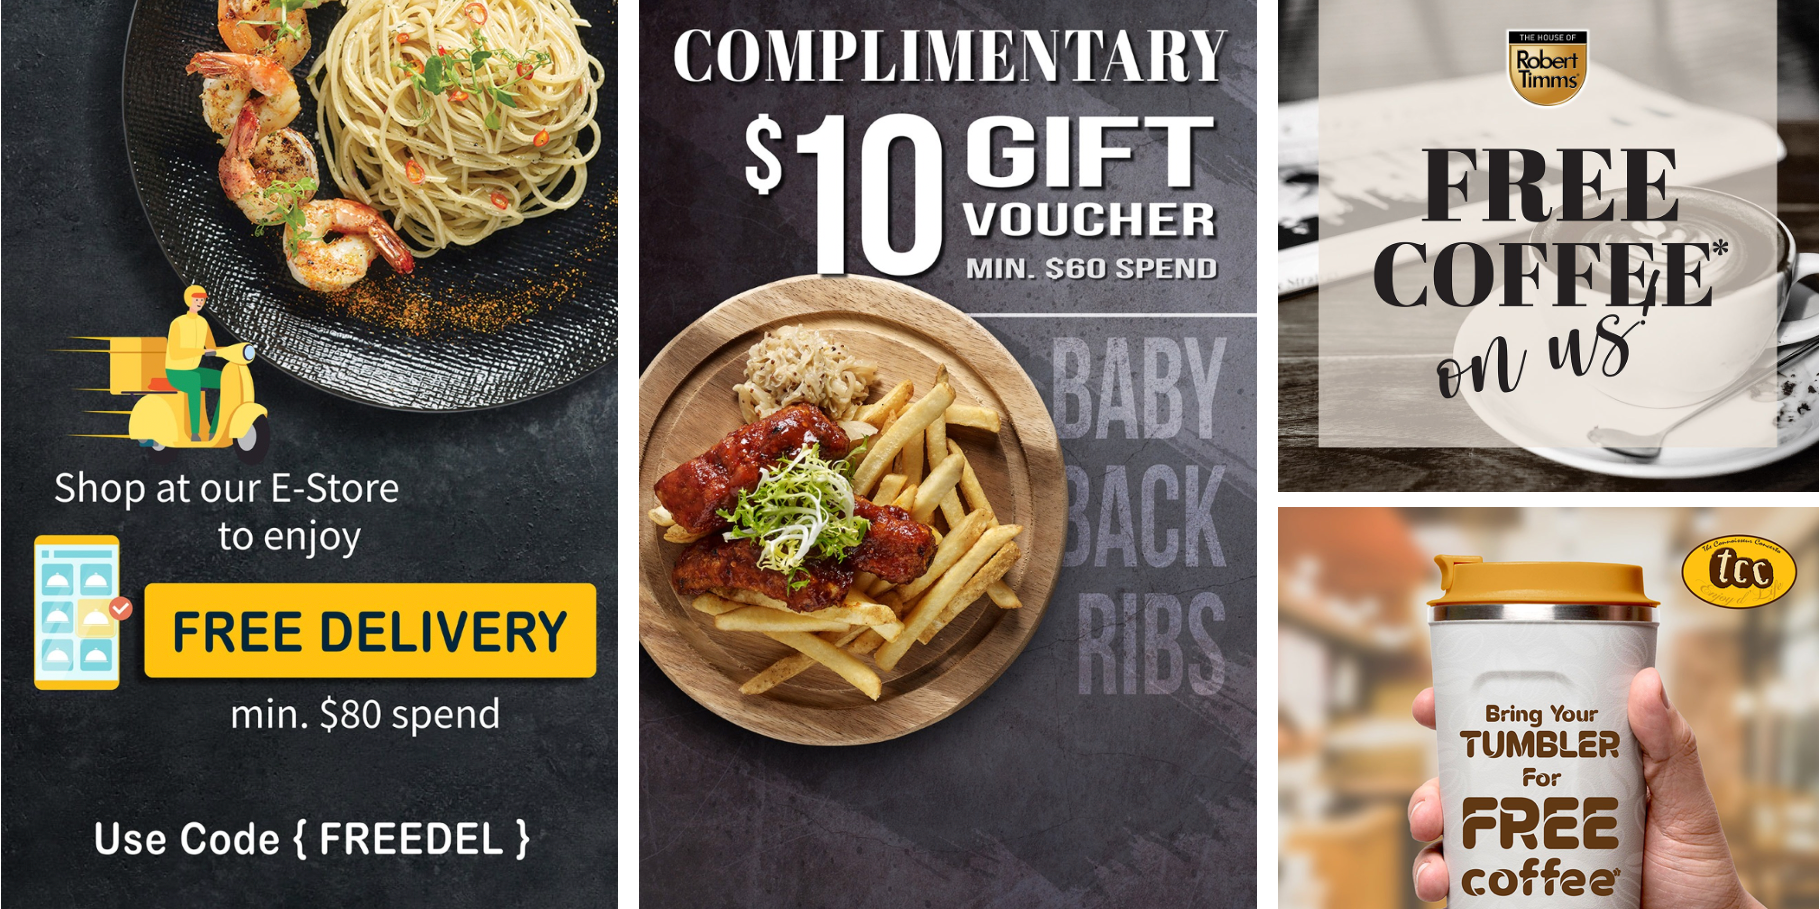 [Promotion] $10 Takeaway Voucher, FREE Coffee & FREE Delivery from tcc & The House Of Robert Timms